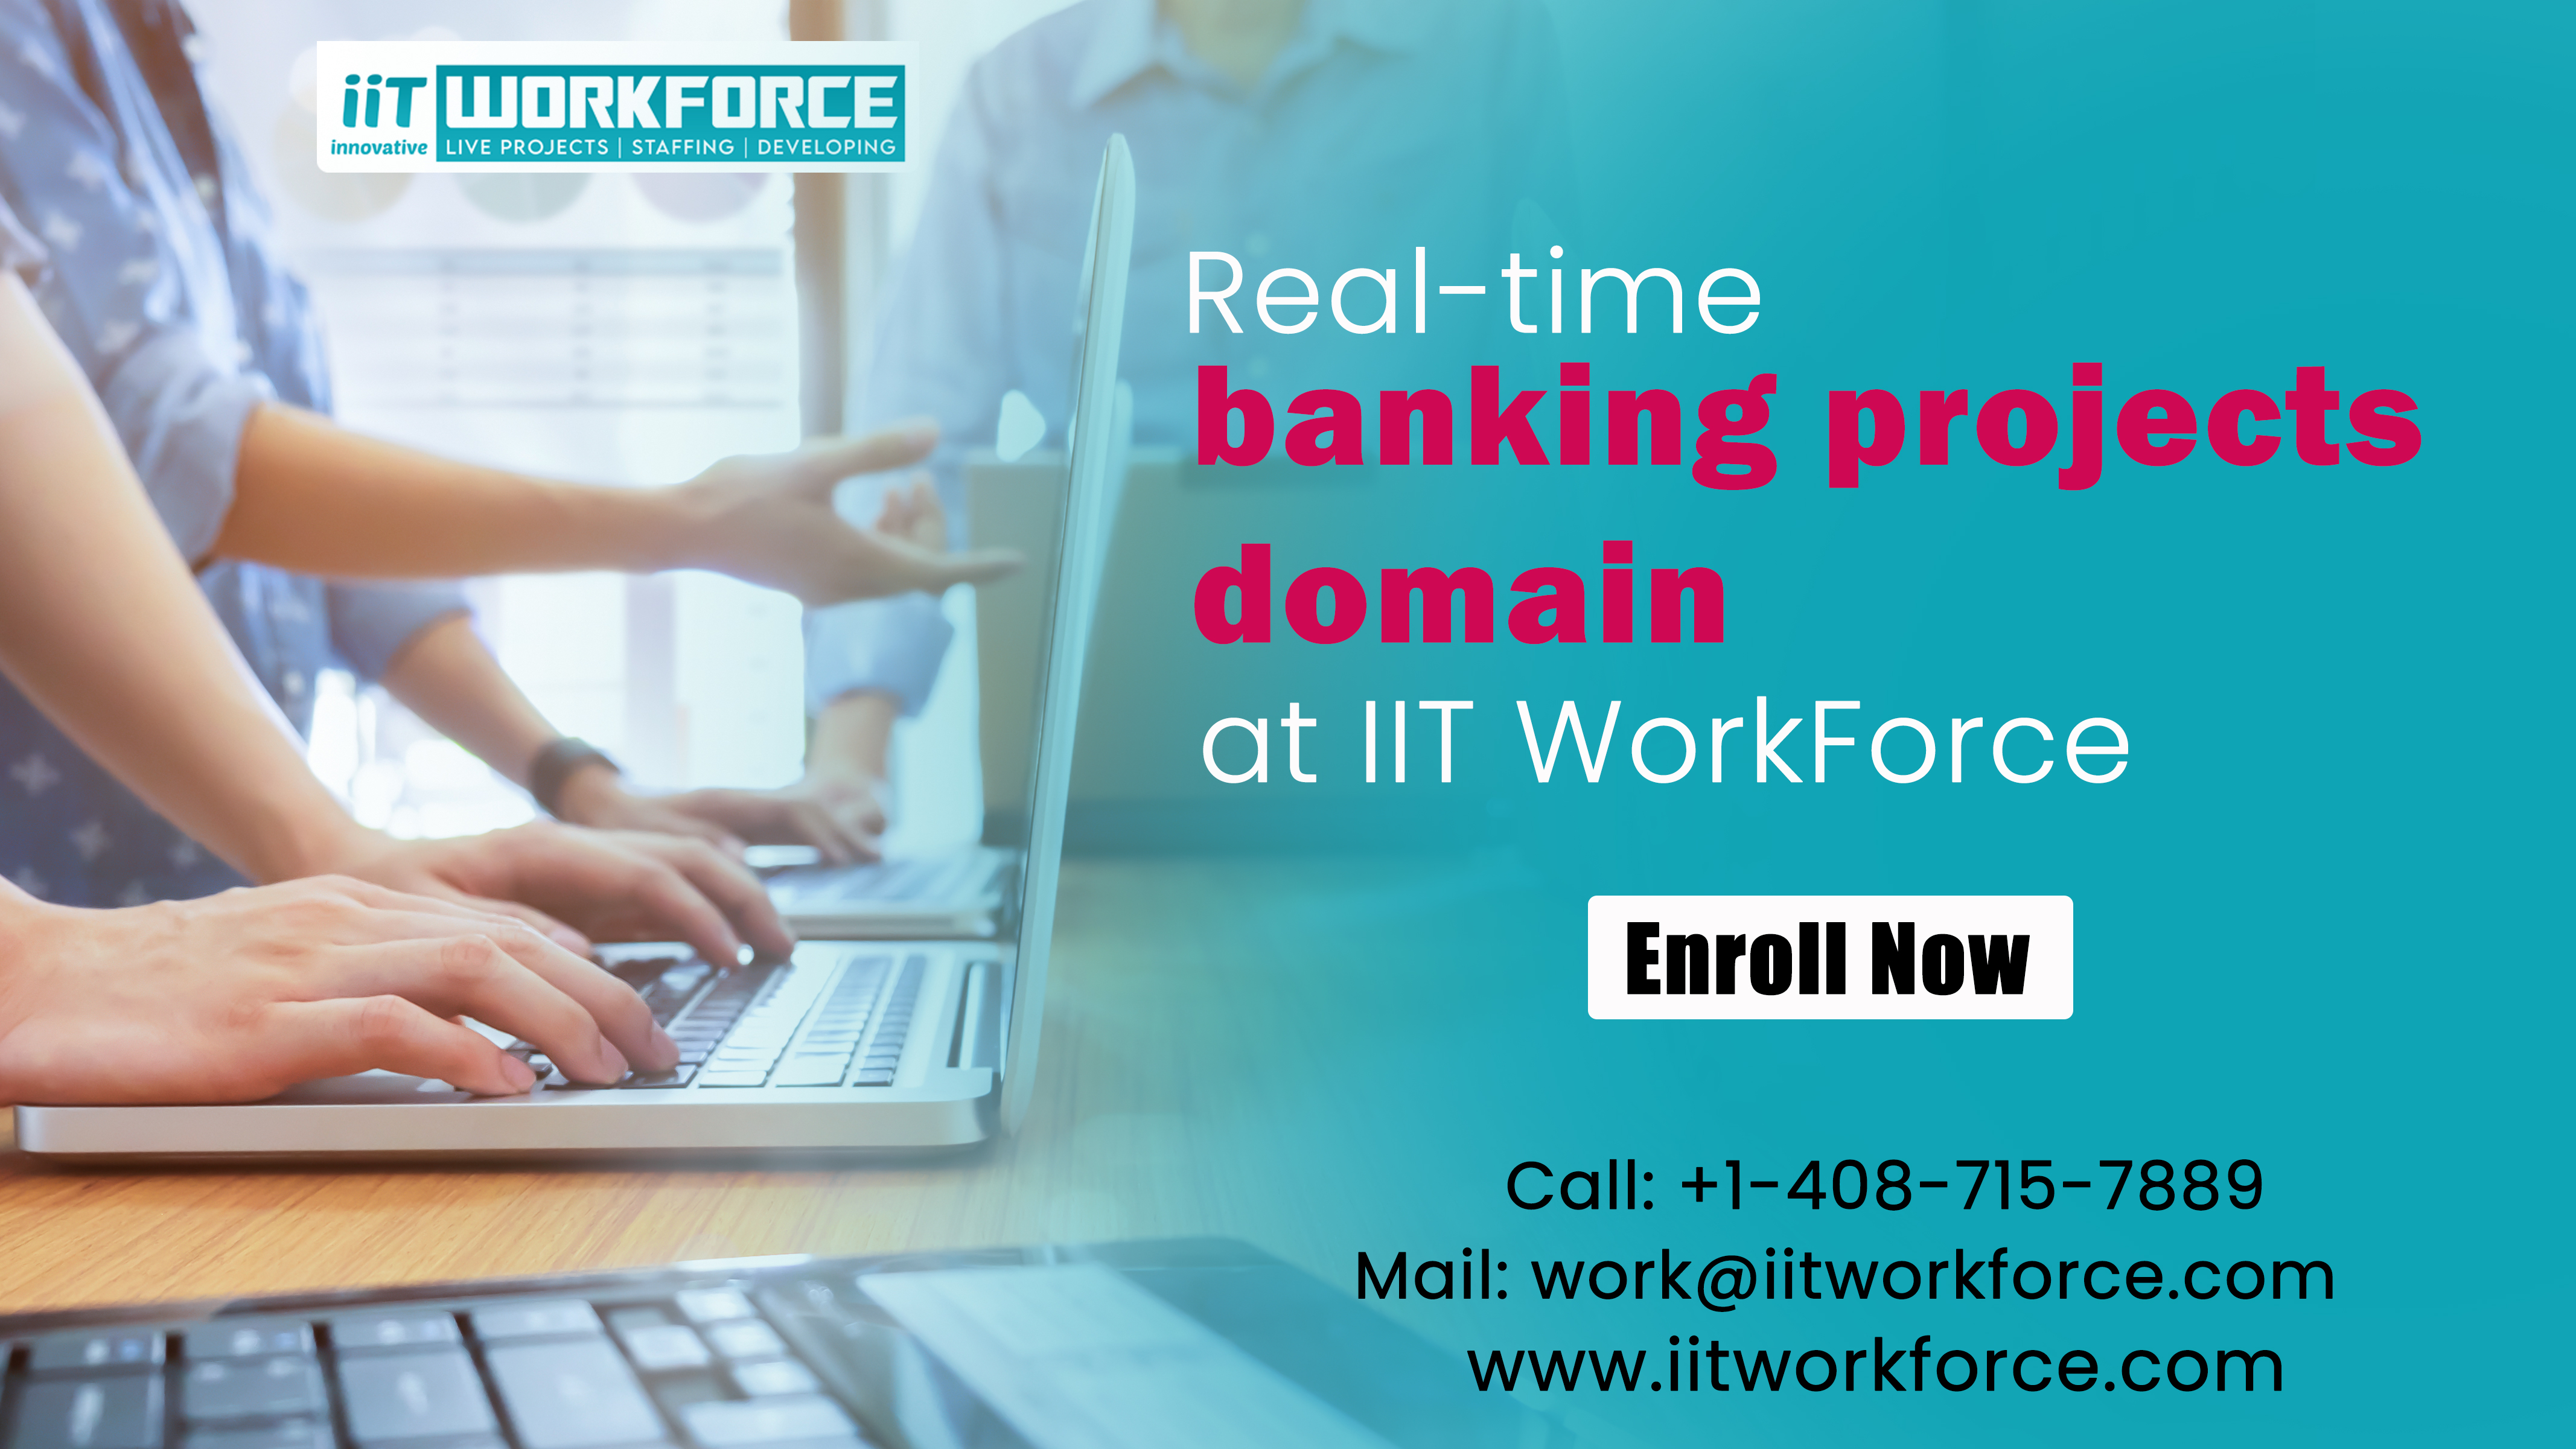 Real-time banking projects domain at iiT WorkForce